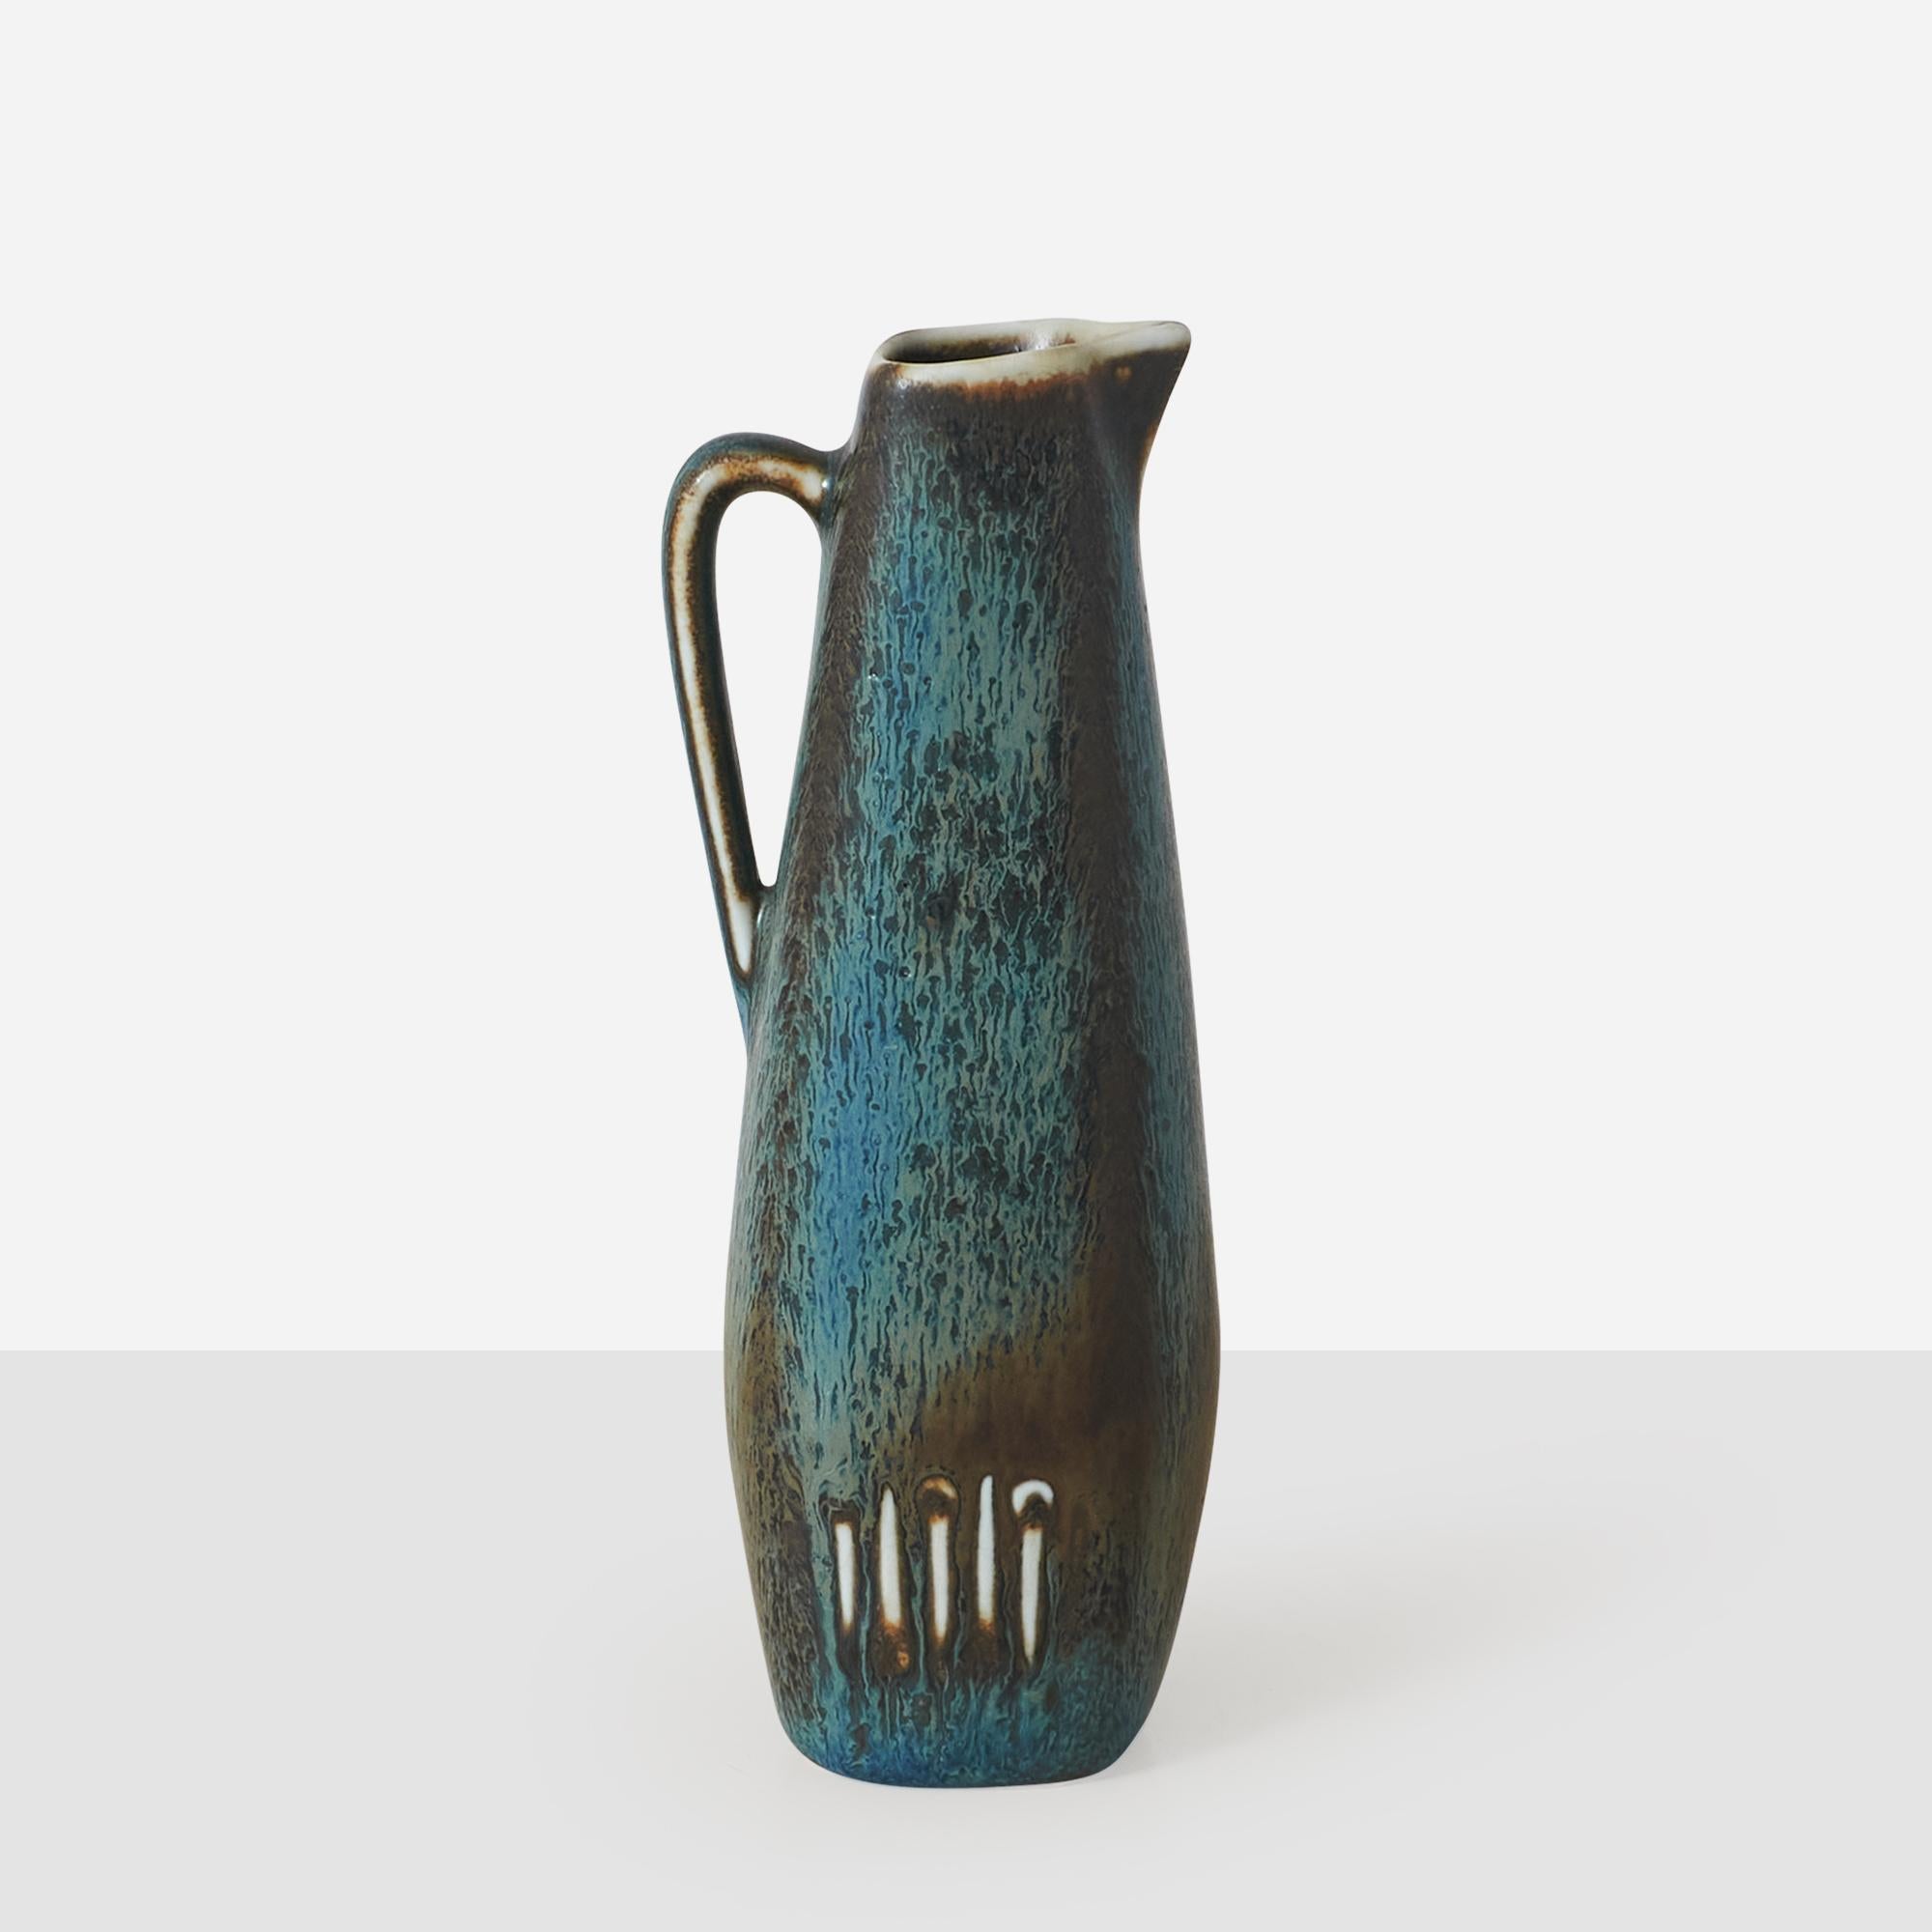 A very small pitcher or vase in hare's fur blue glaze by Gunnar Nylund for Rorstrand. Impressed on the bottom by both the creator and manufacturer's mark. 